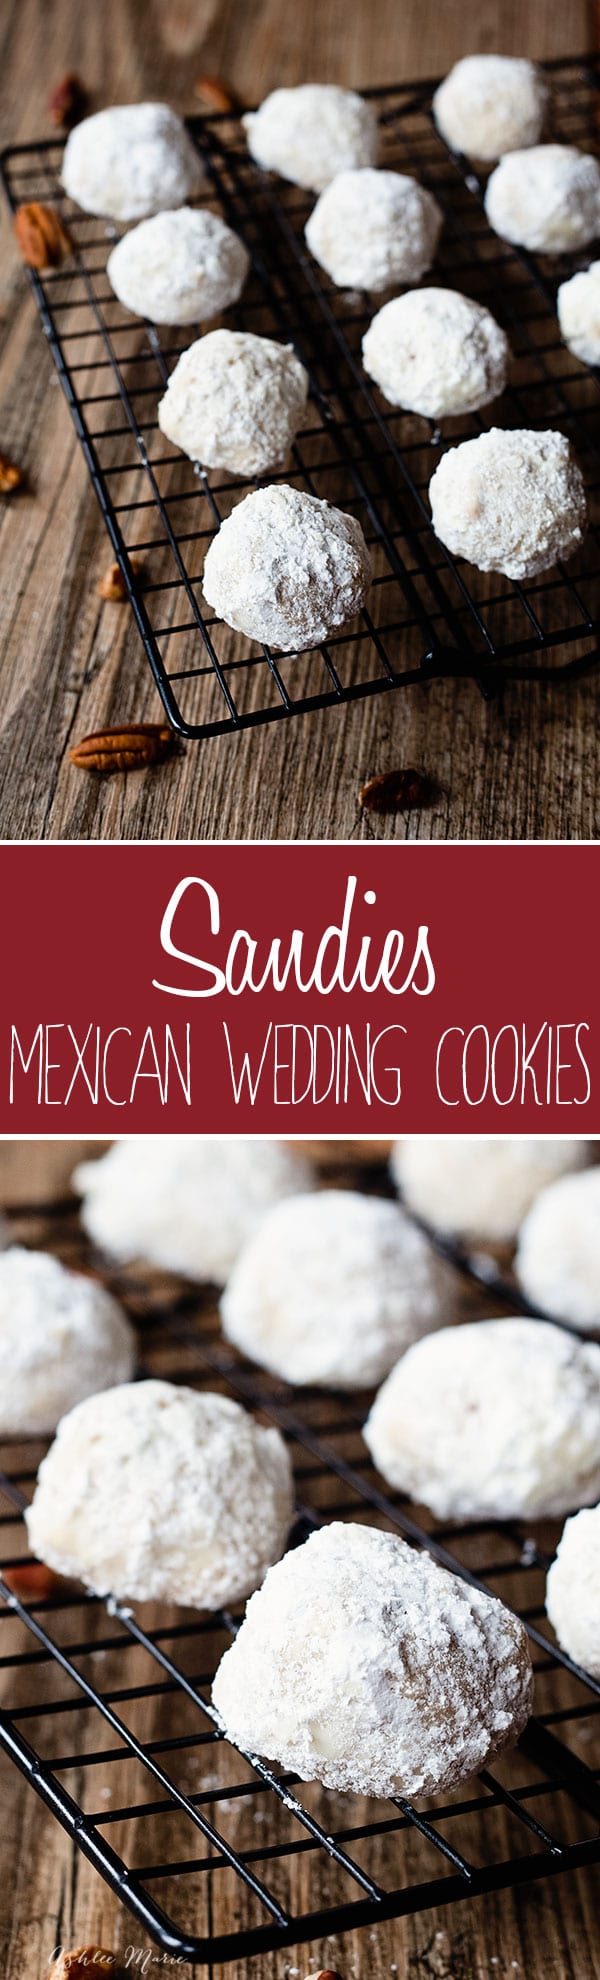 these pecan cookies are known by many names, sandies, mexican wedding cookies or snowballs. The point is they are delicious and everyone loves them